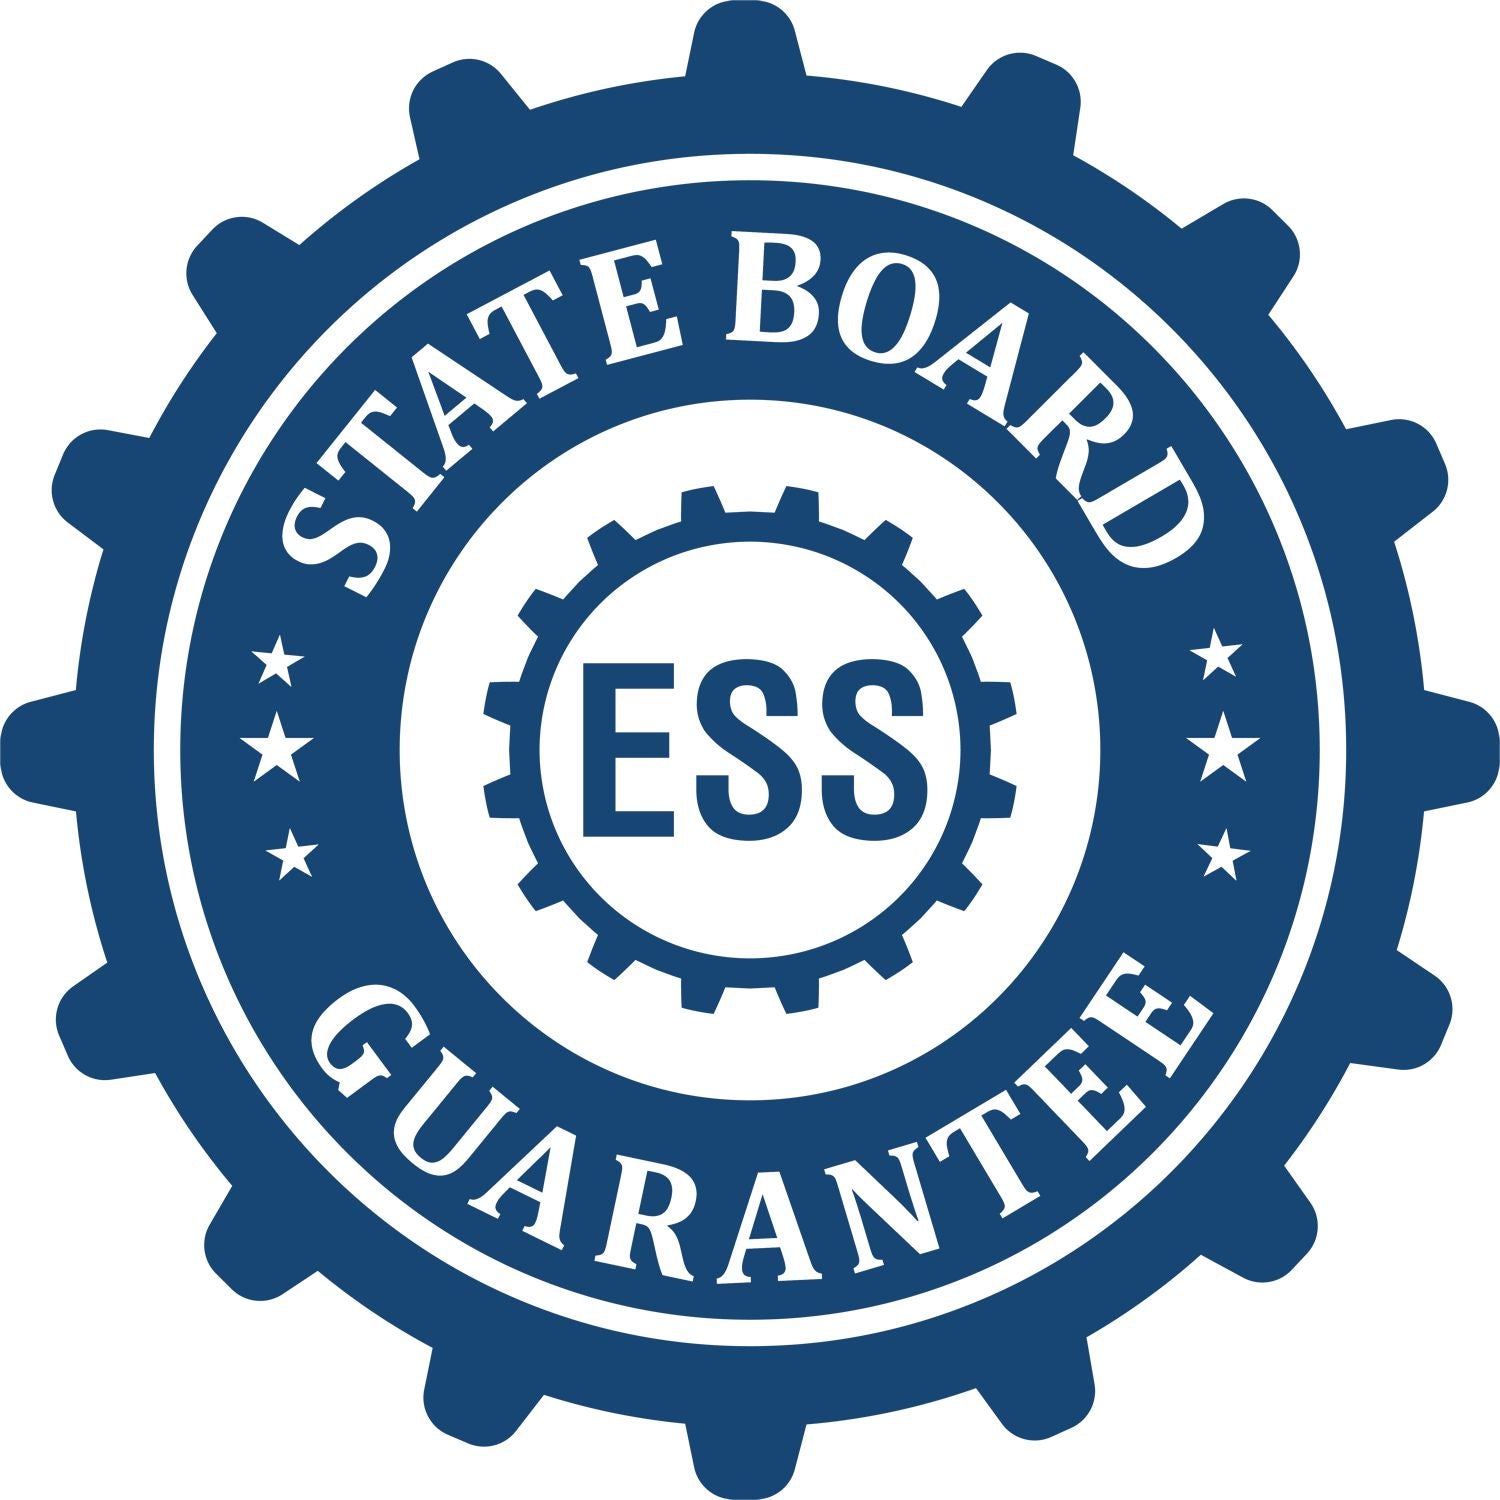 An emblem in a gear shape illustrating a state board guarantee for the Heavy Duty Tennessee Landscape Architect Cast Iron Embosser product.